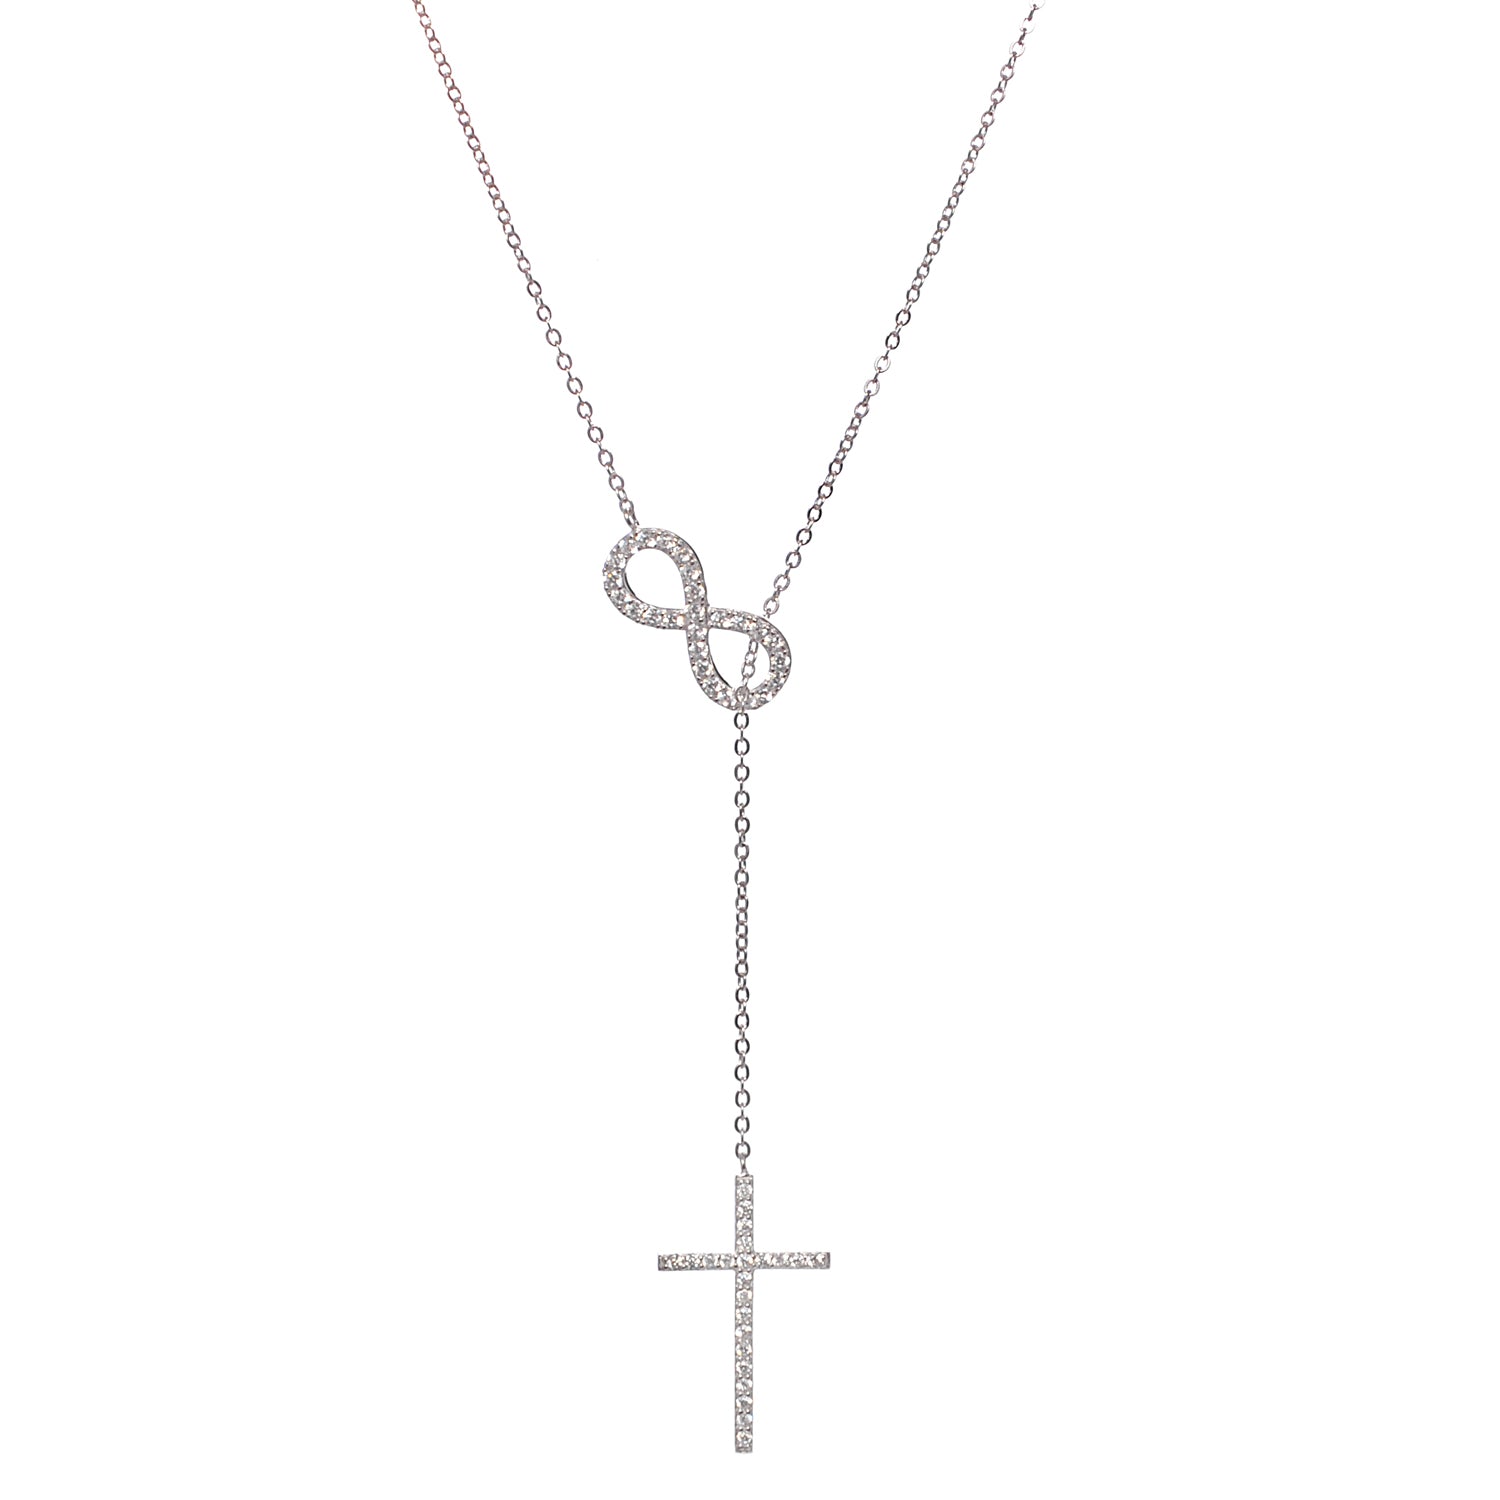 Mary Sterling Silver Infinity Cross Y-Necklace with CZ Crystals